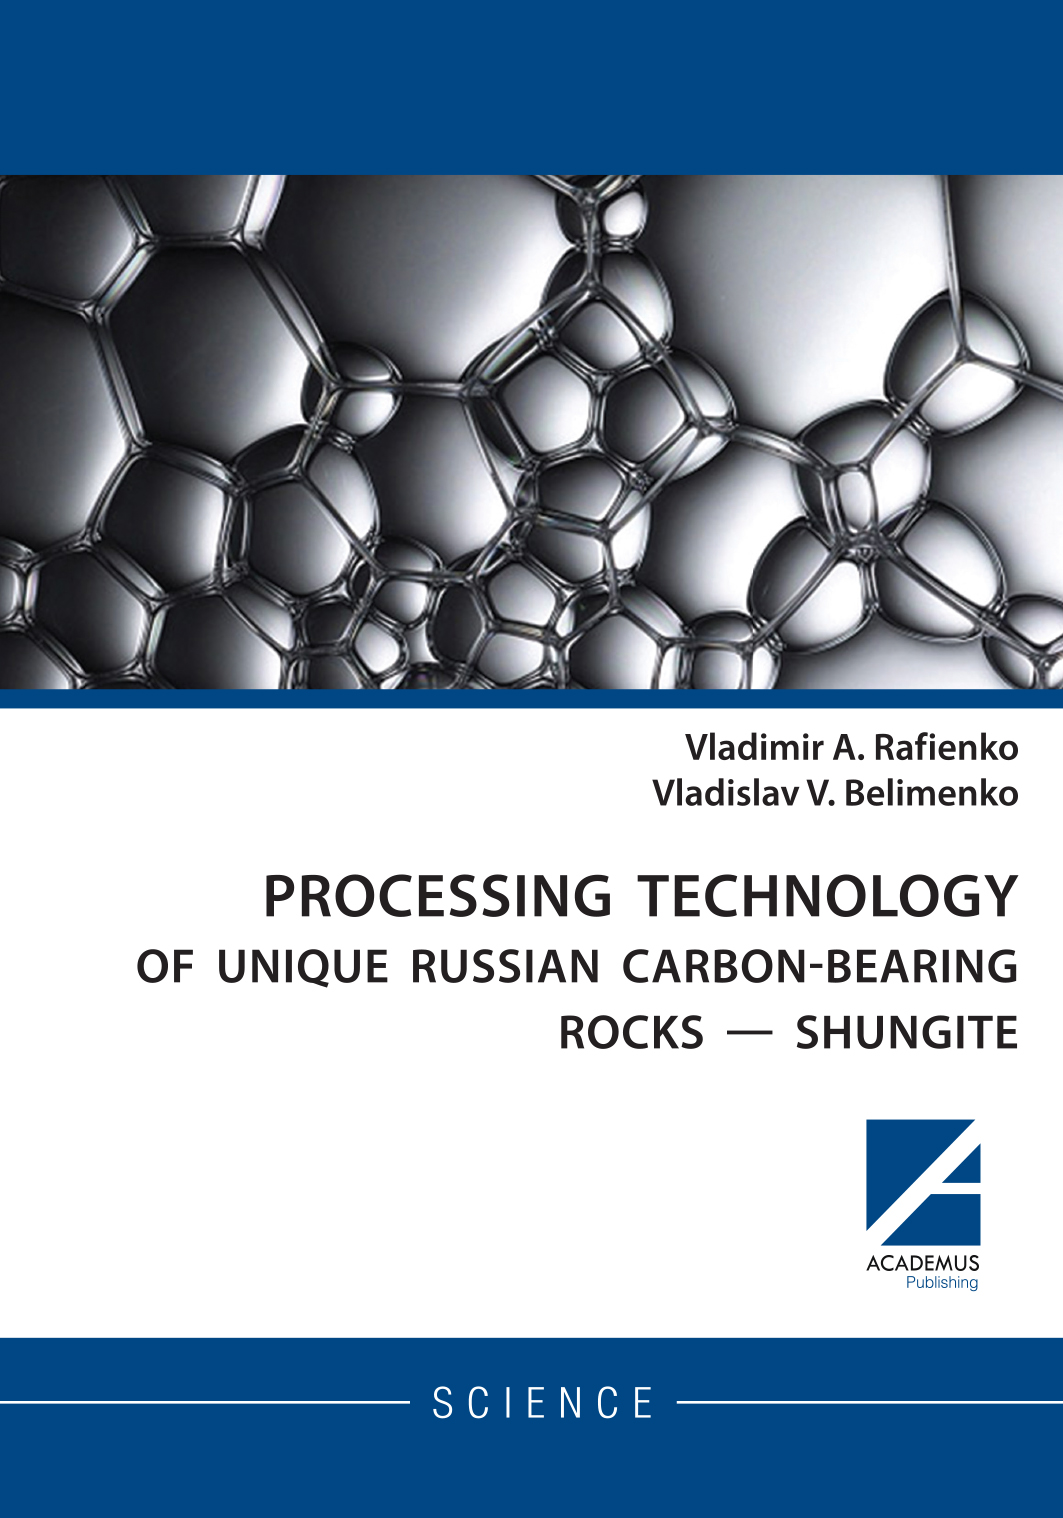                         PROCESSING TECHNOLOGY OF UNIQUE RUSSIAN CARBON-BEARING ROCKS – SHUNGITE
            